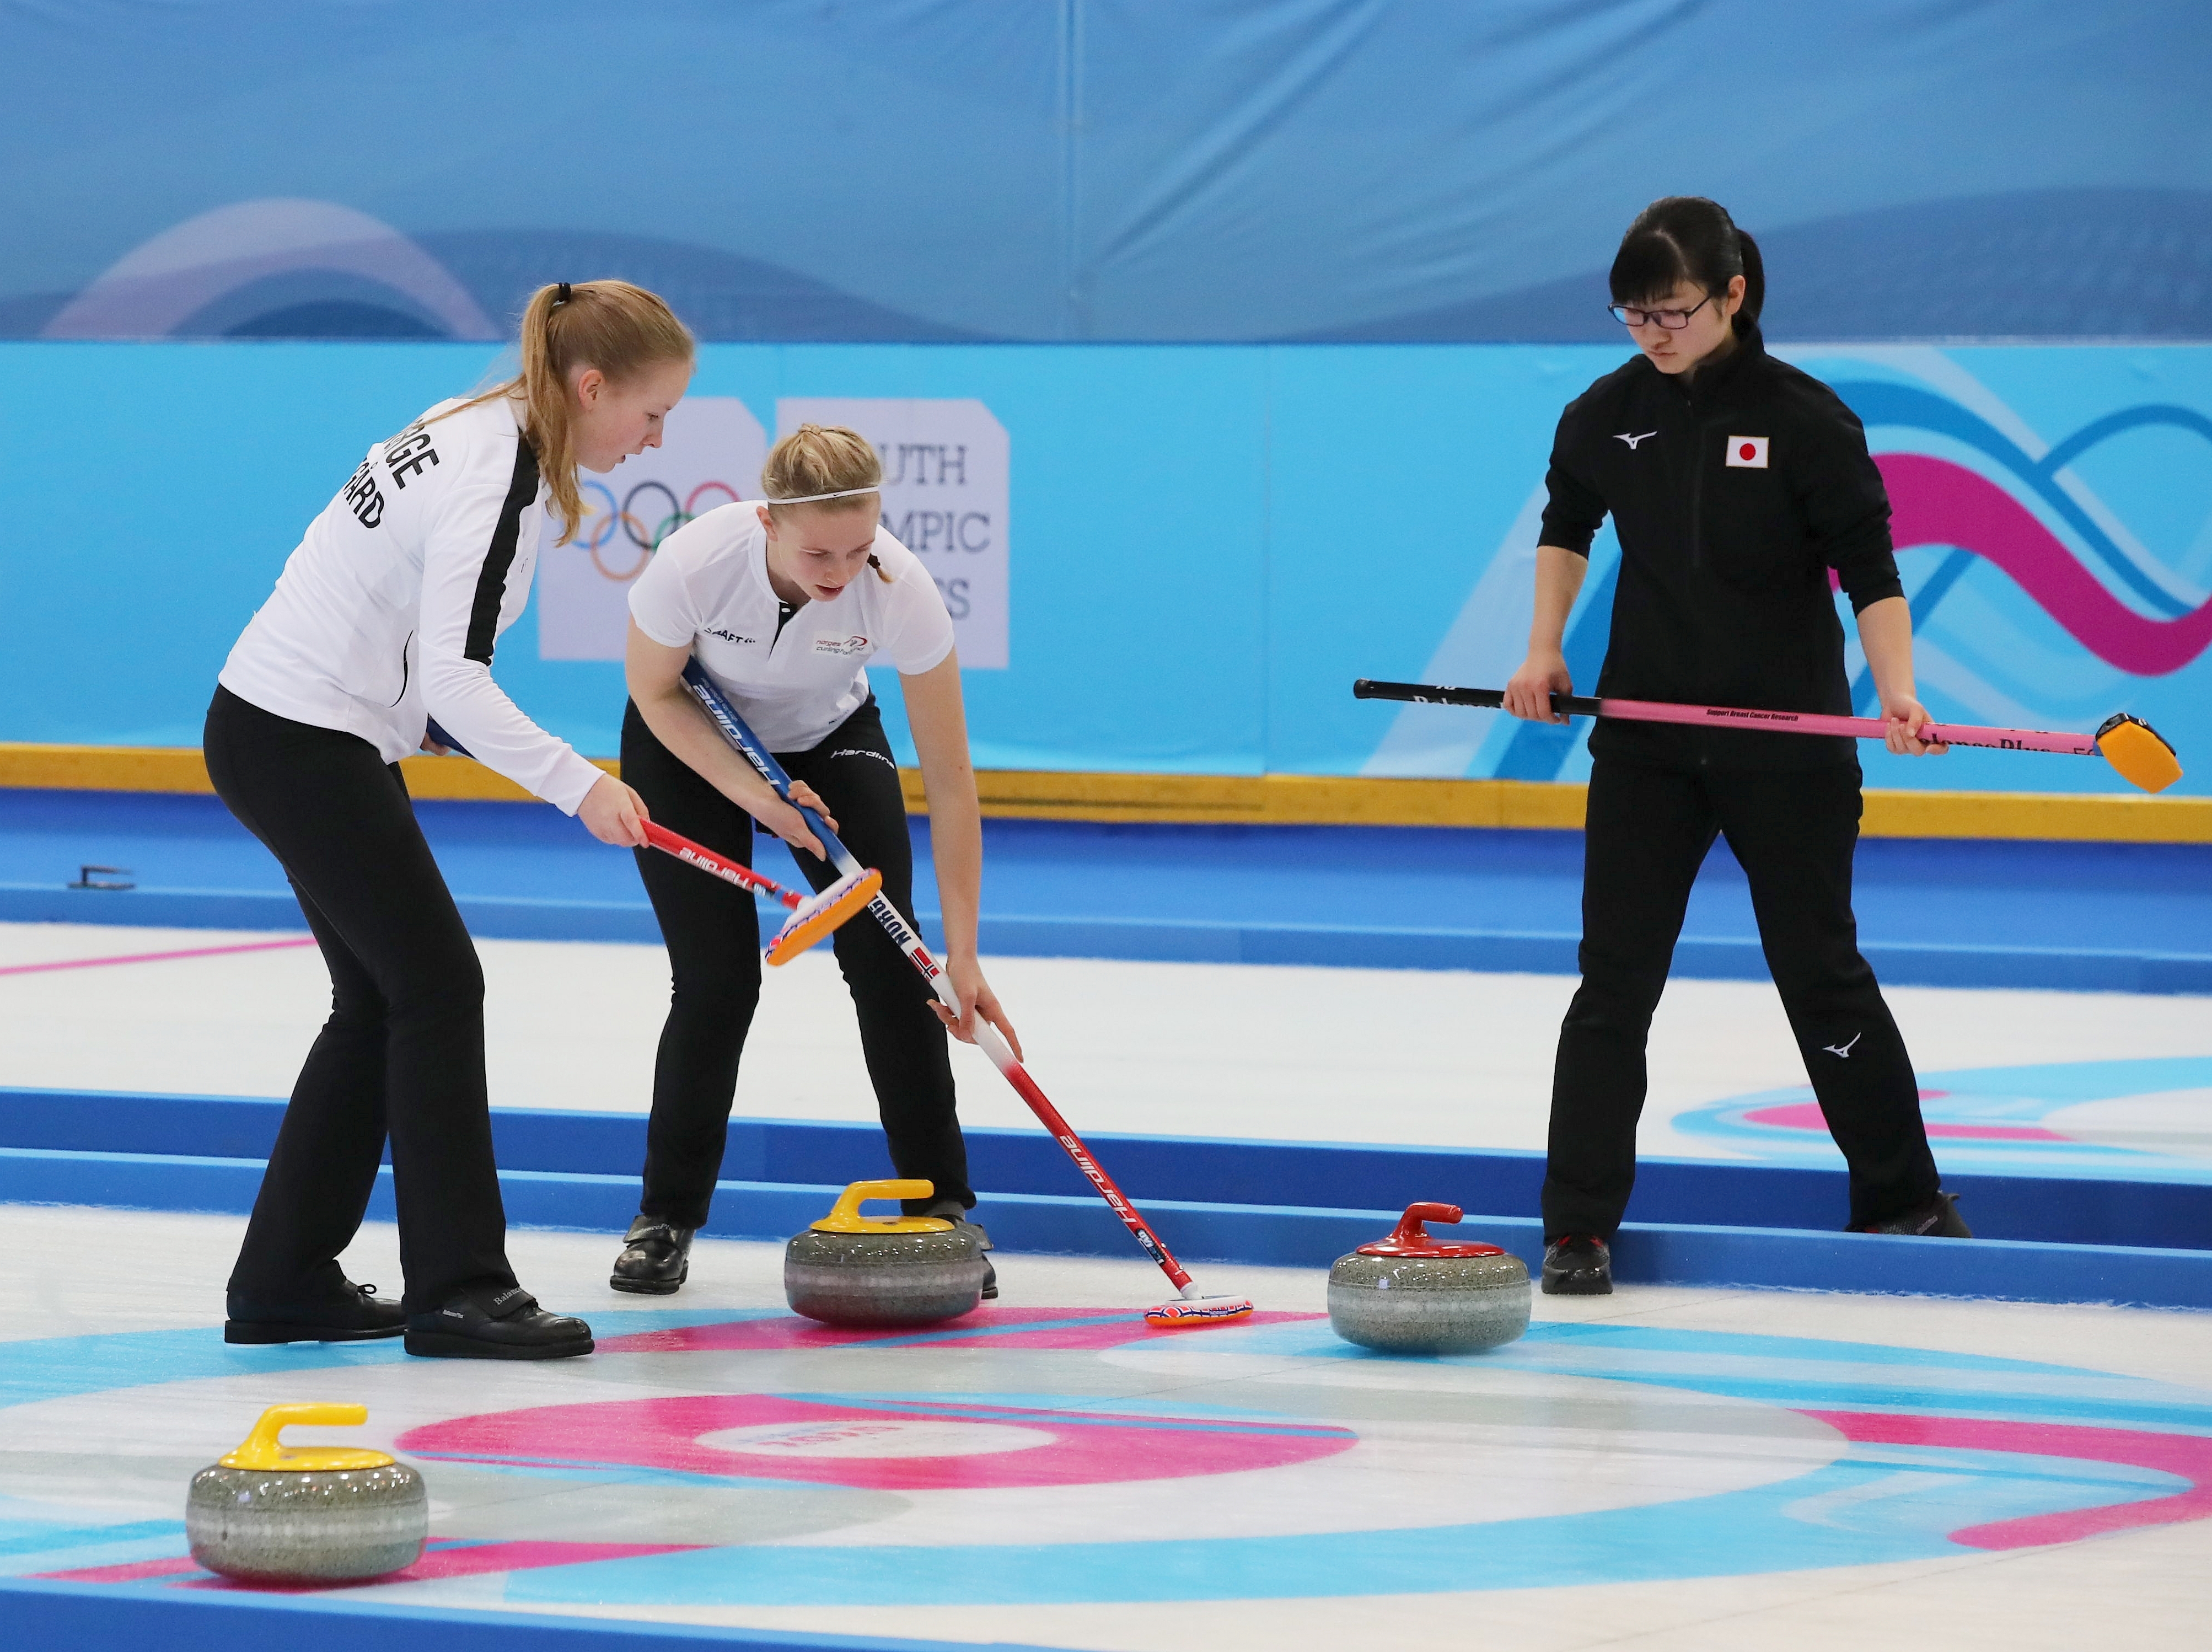 File:2020-01-16 Curling at the 2020 Winter Youth Olympics – Mixed Team – Gold Medal Game (Martin Rulsch) 075.jpg - Wikimedia Commons